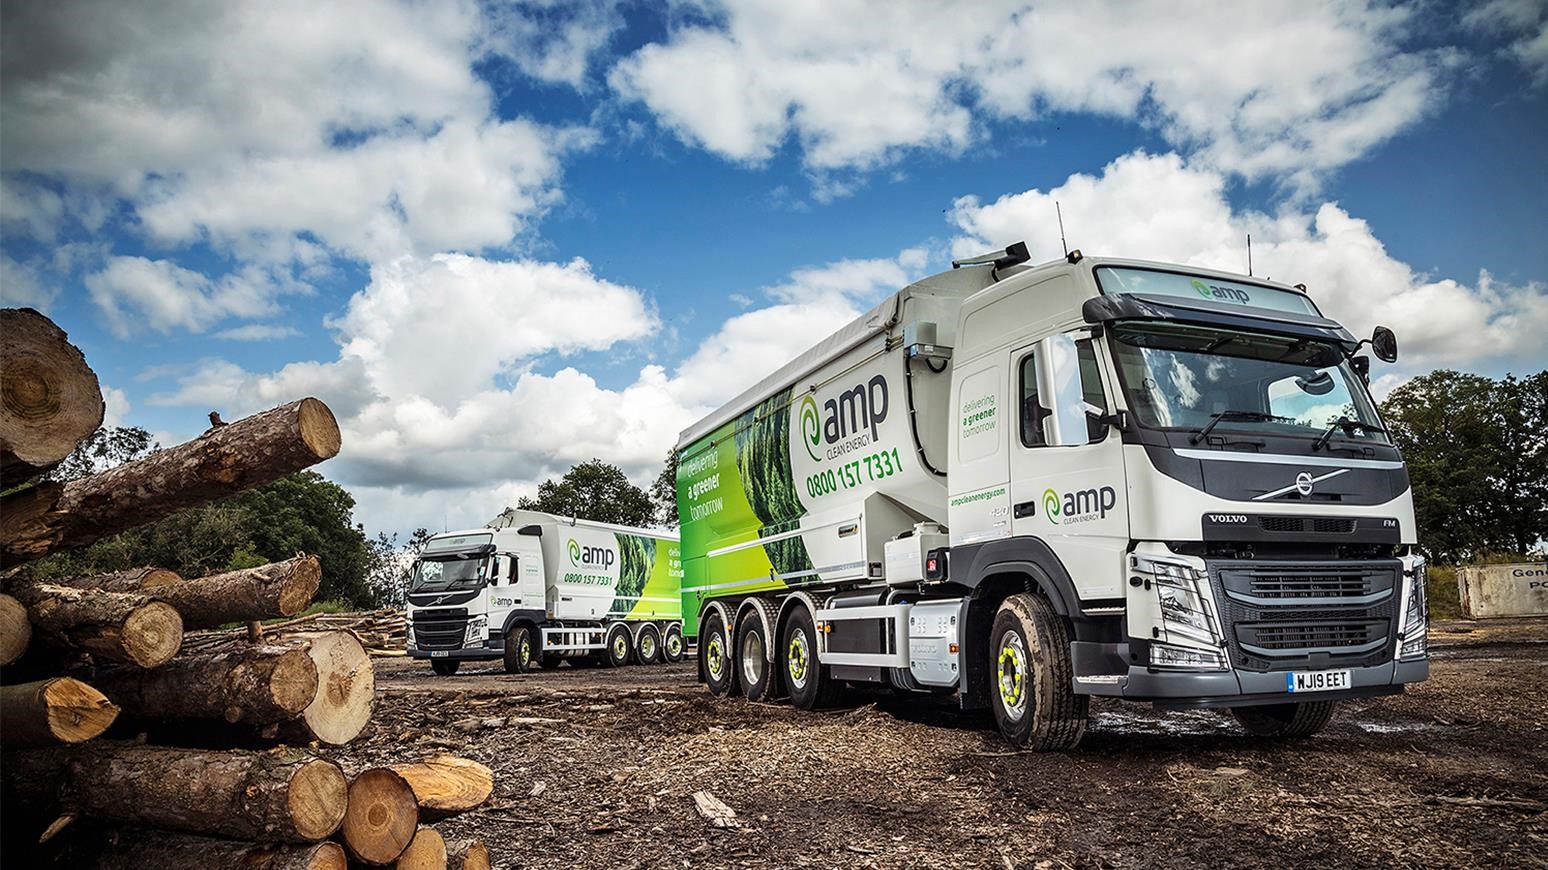 London-Based AMP Clean Energy Adds Two New Volvo FM Rigid Trucks For Wood Pellet Deliveries